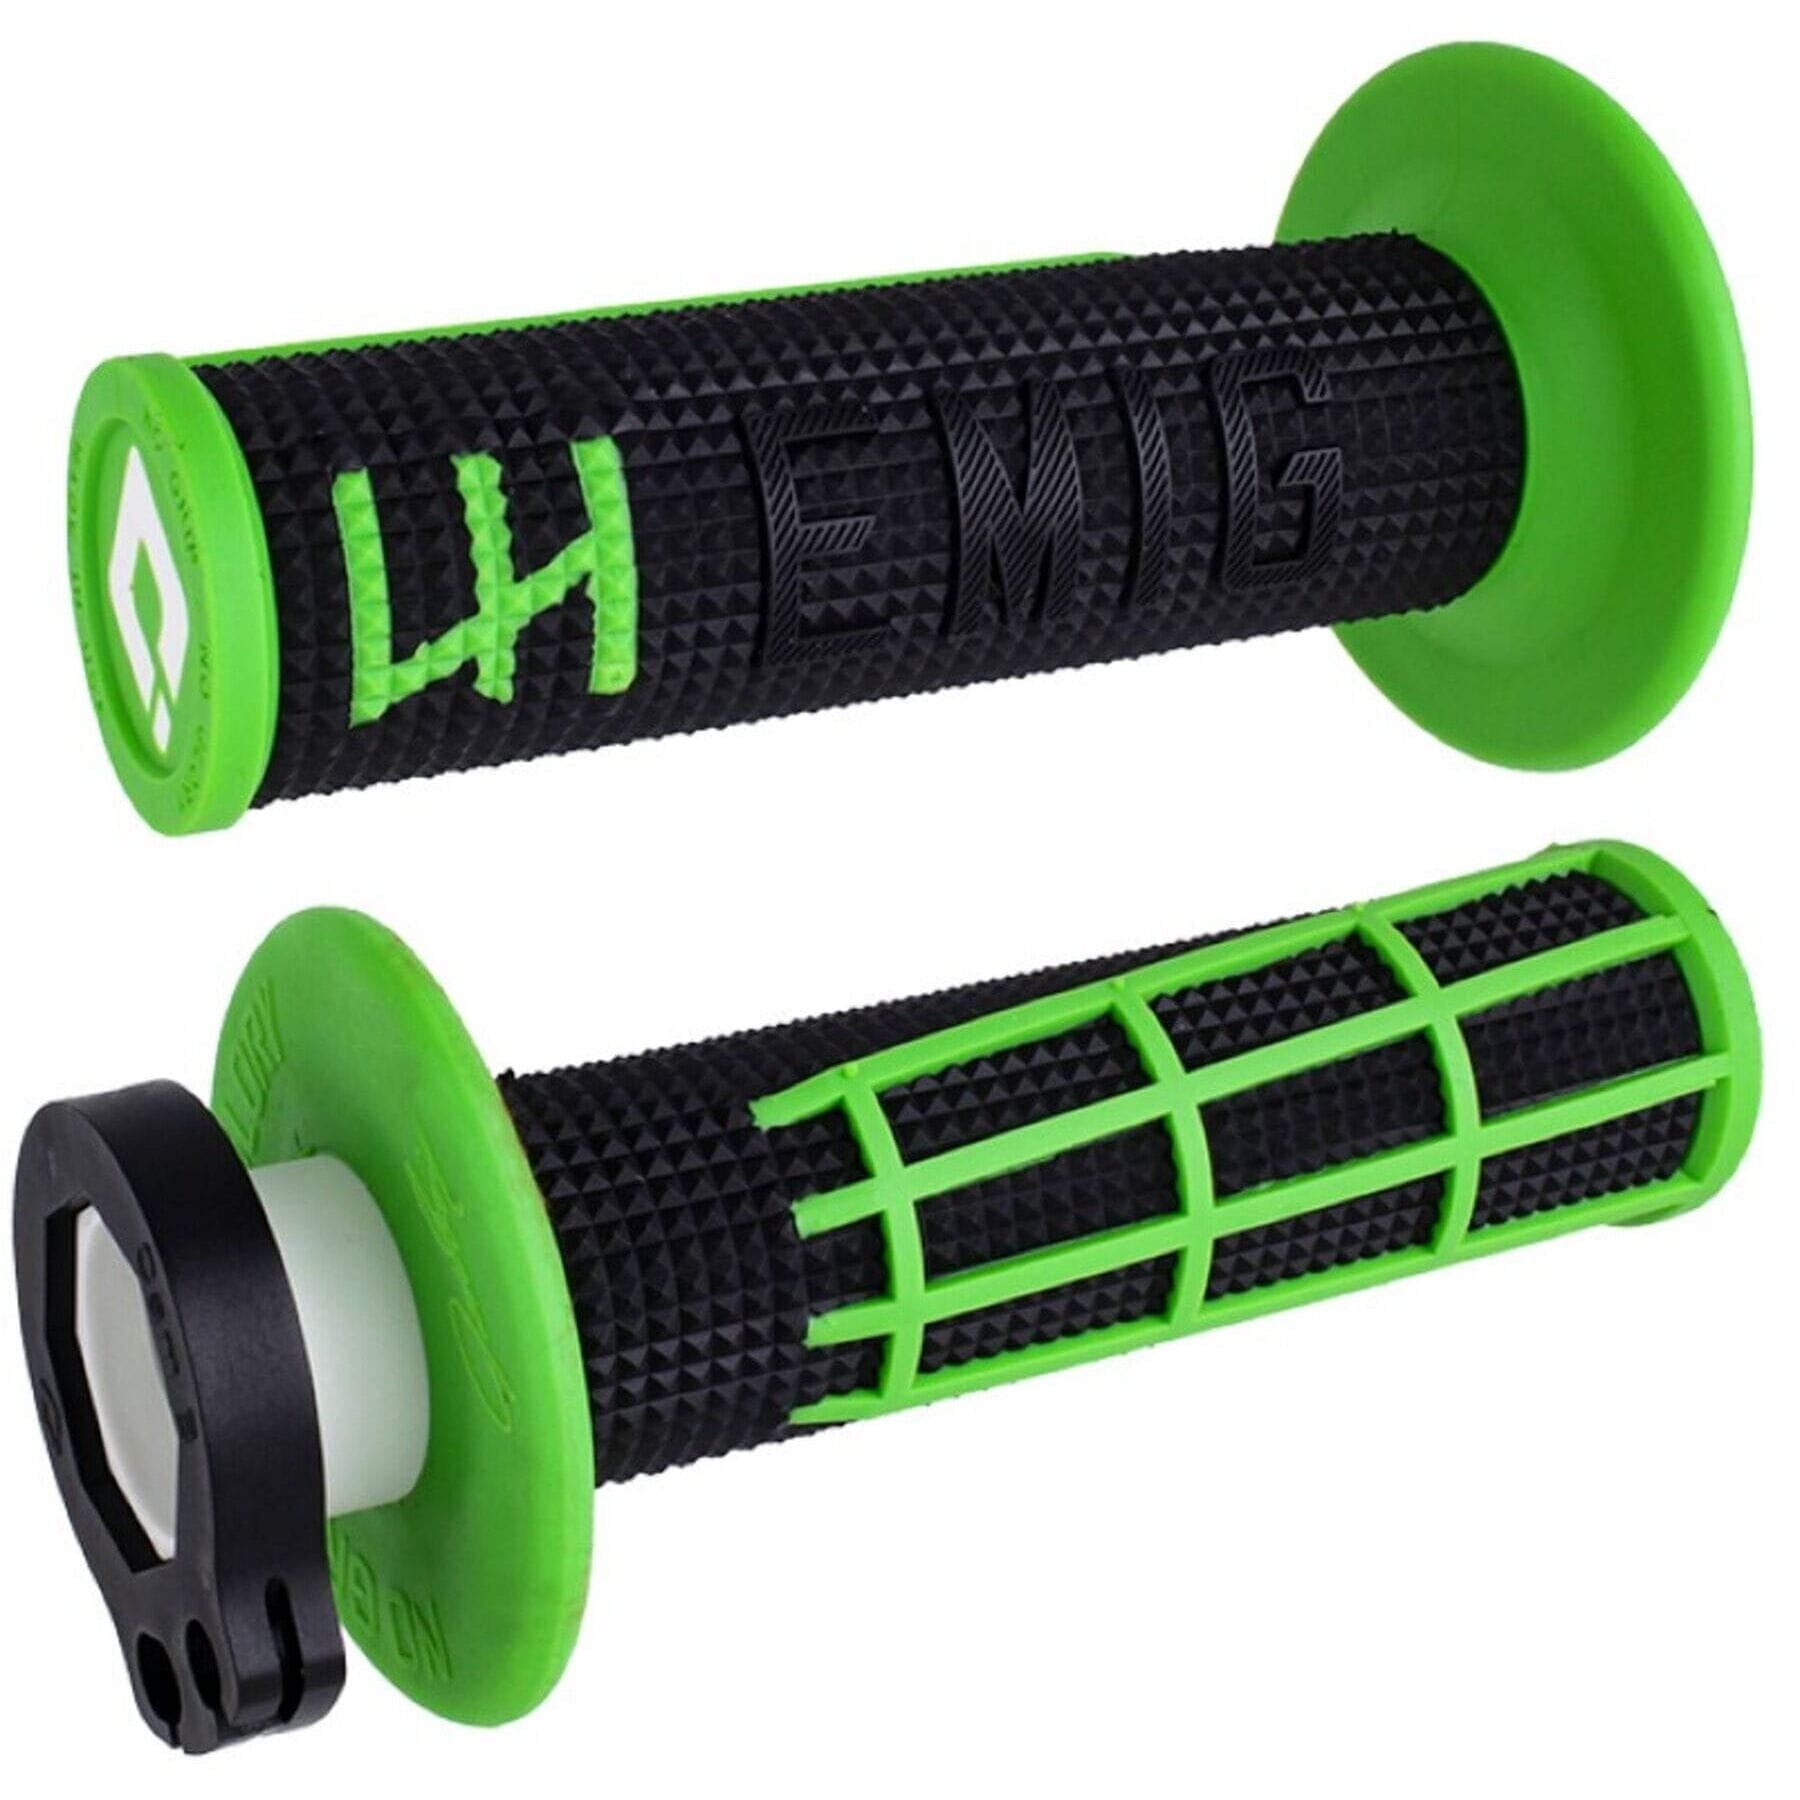 EMIG 2.0 Lock On Grip in Black and Green for Motorcycles